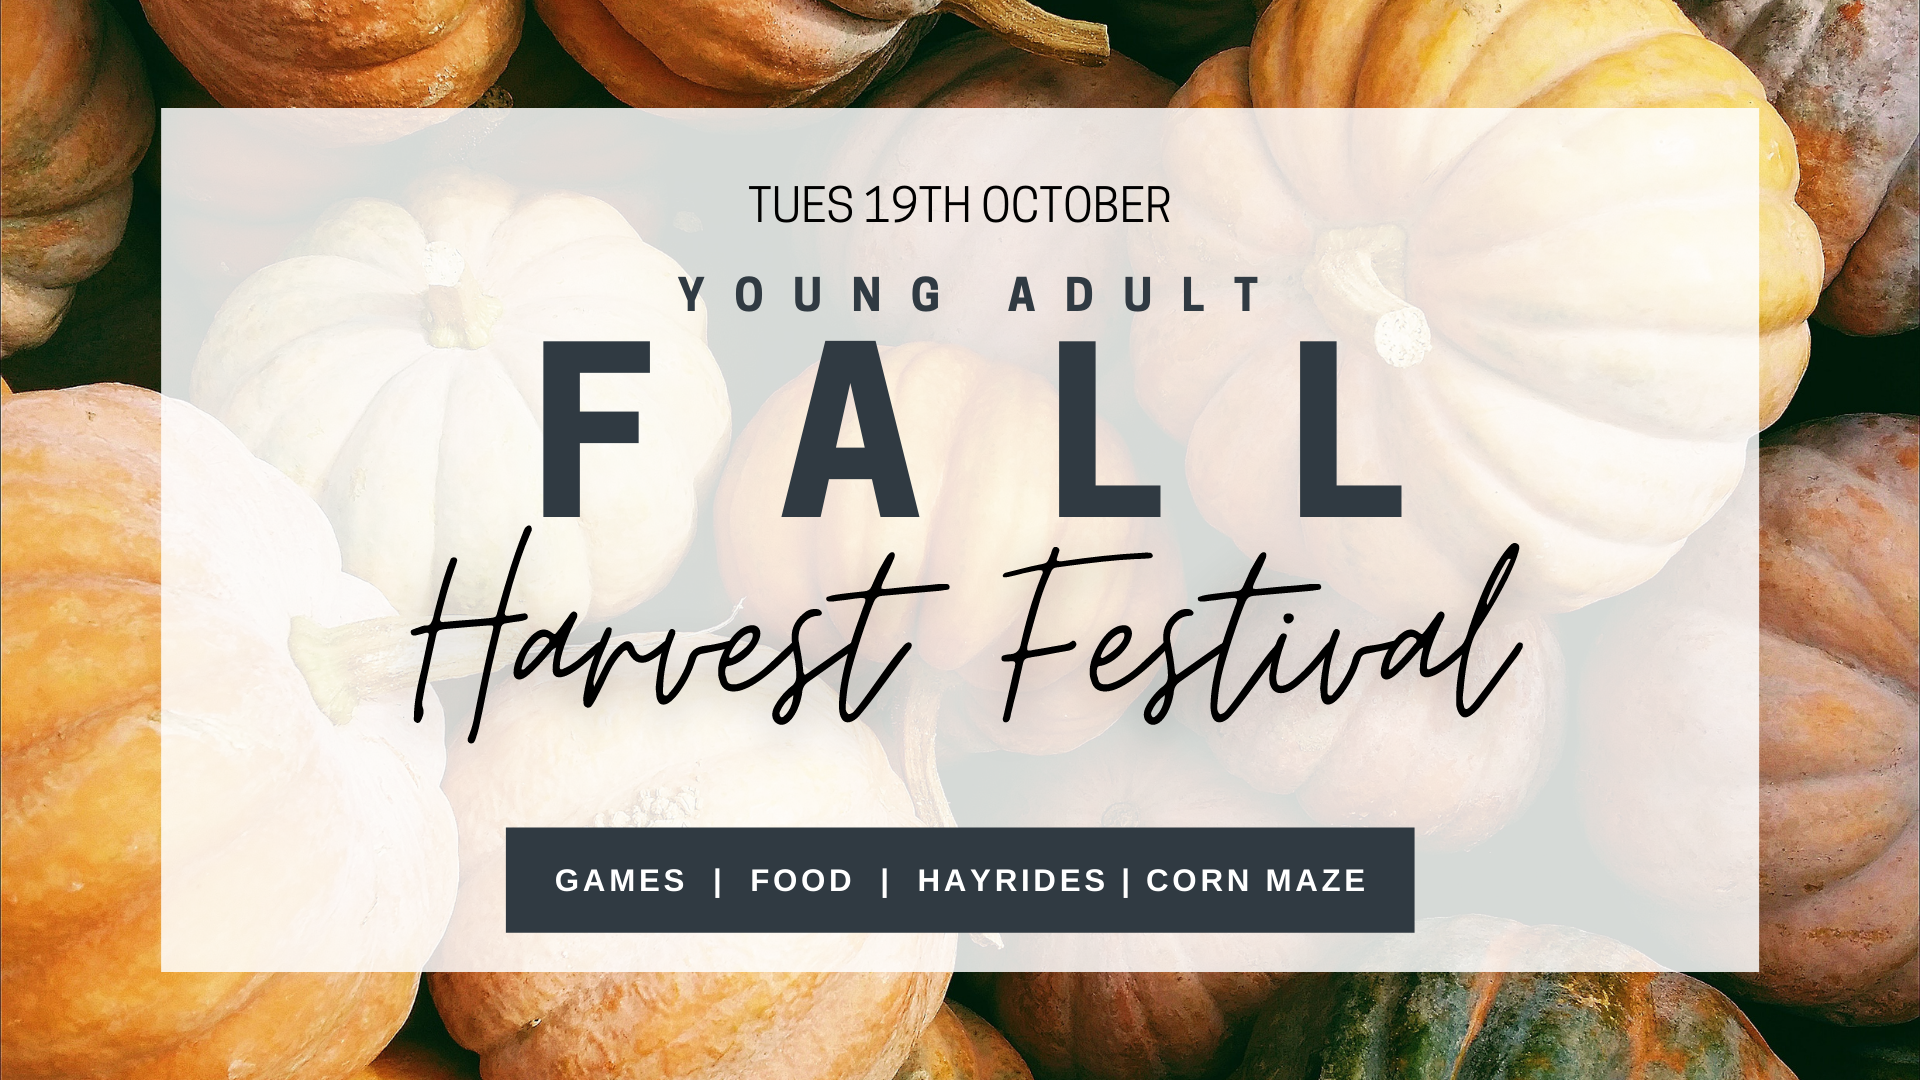 Y.A. Fall Harvest Festival 2 (1920 x 1080 px) image